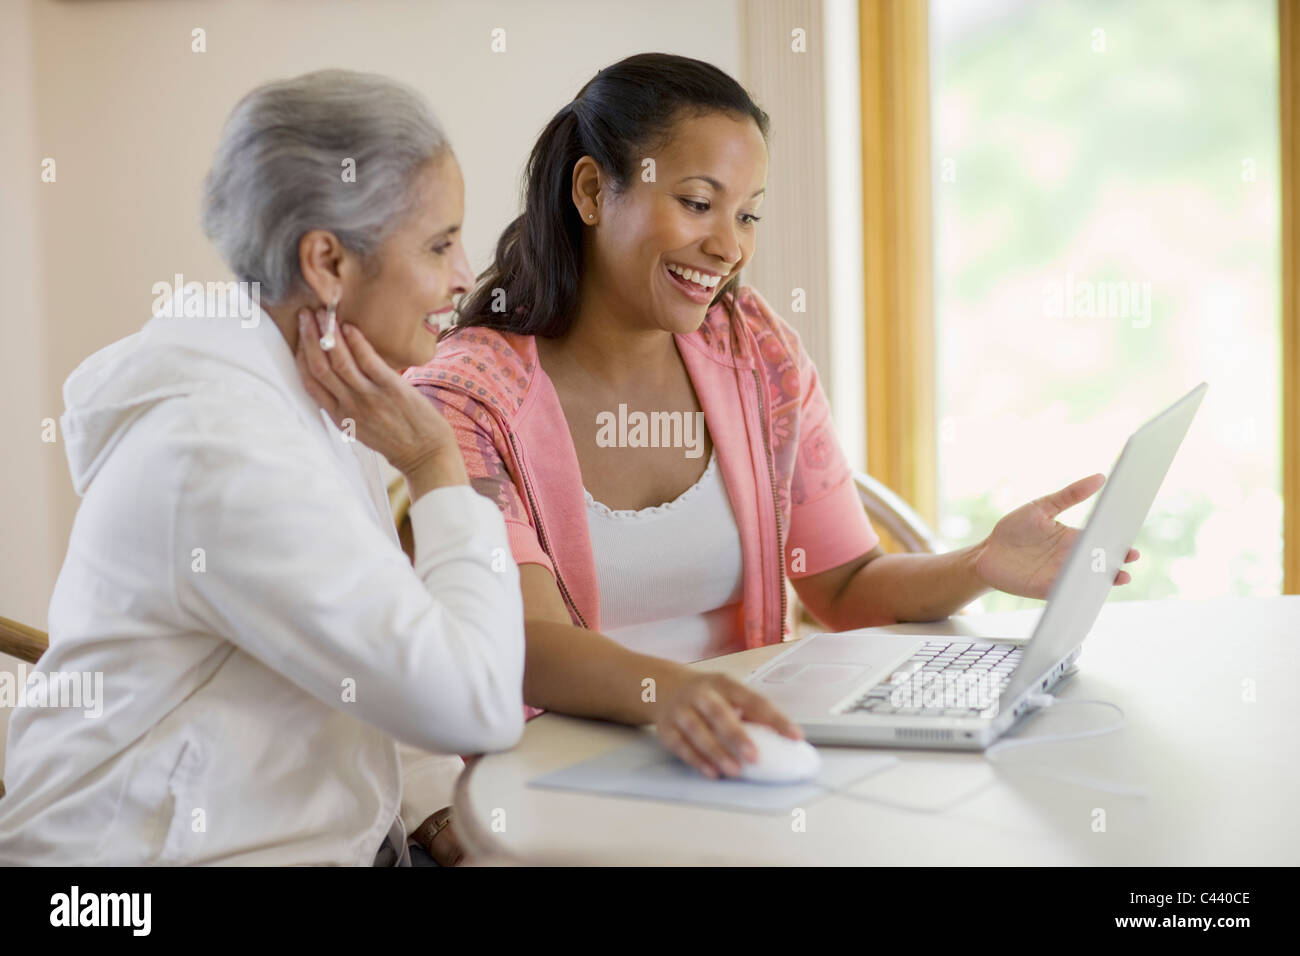 Attractive black mother and daughter using computer Stock Photo